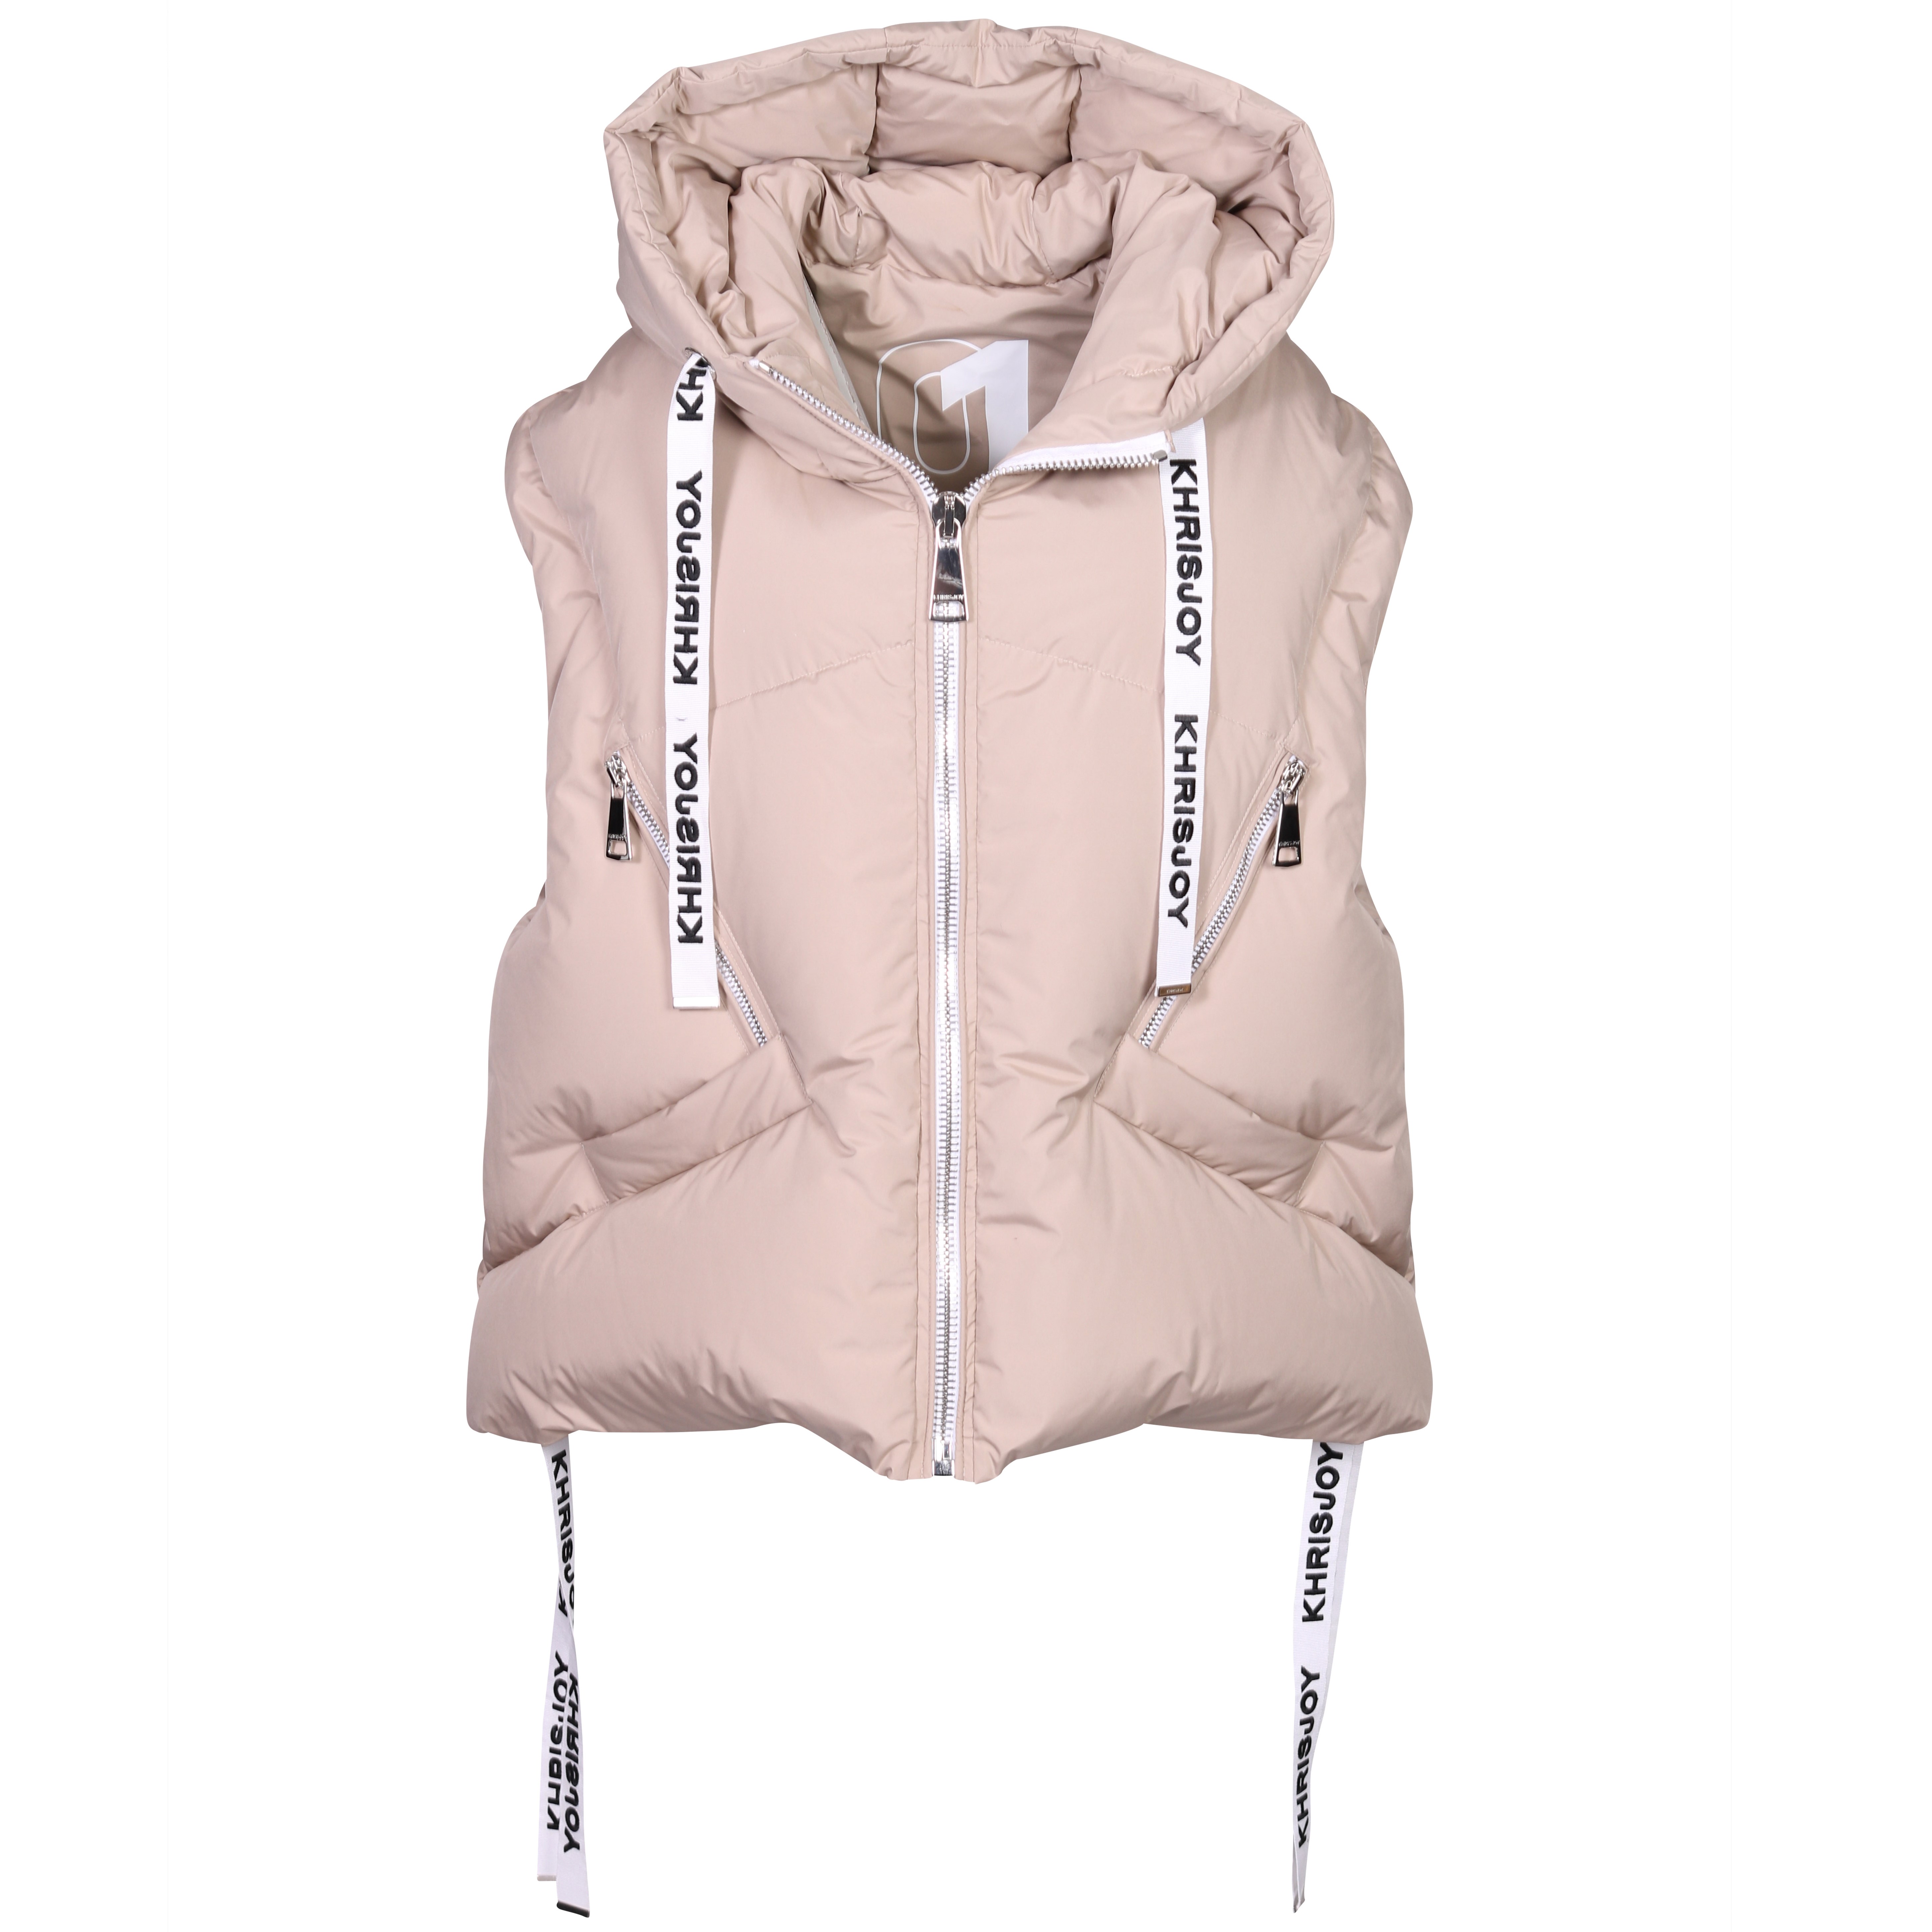 Khrisjoy Iconic Puffer Vest in Sand